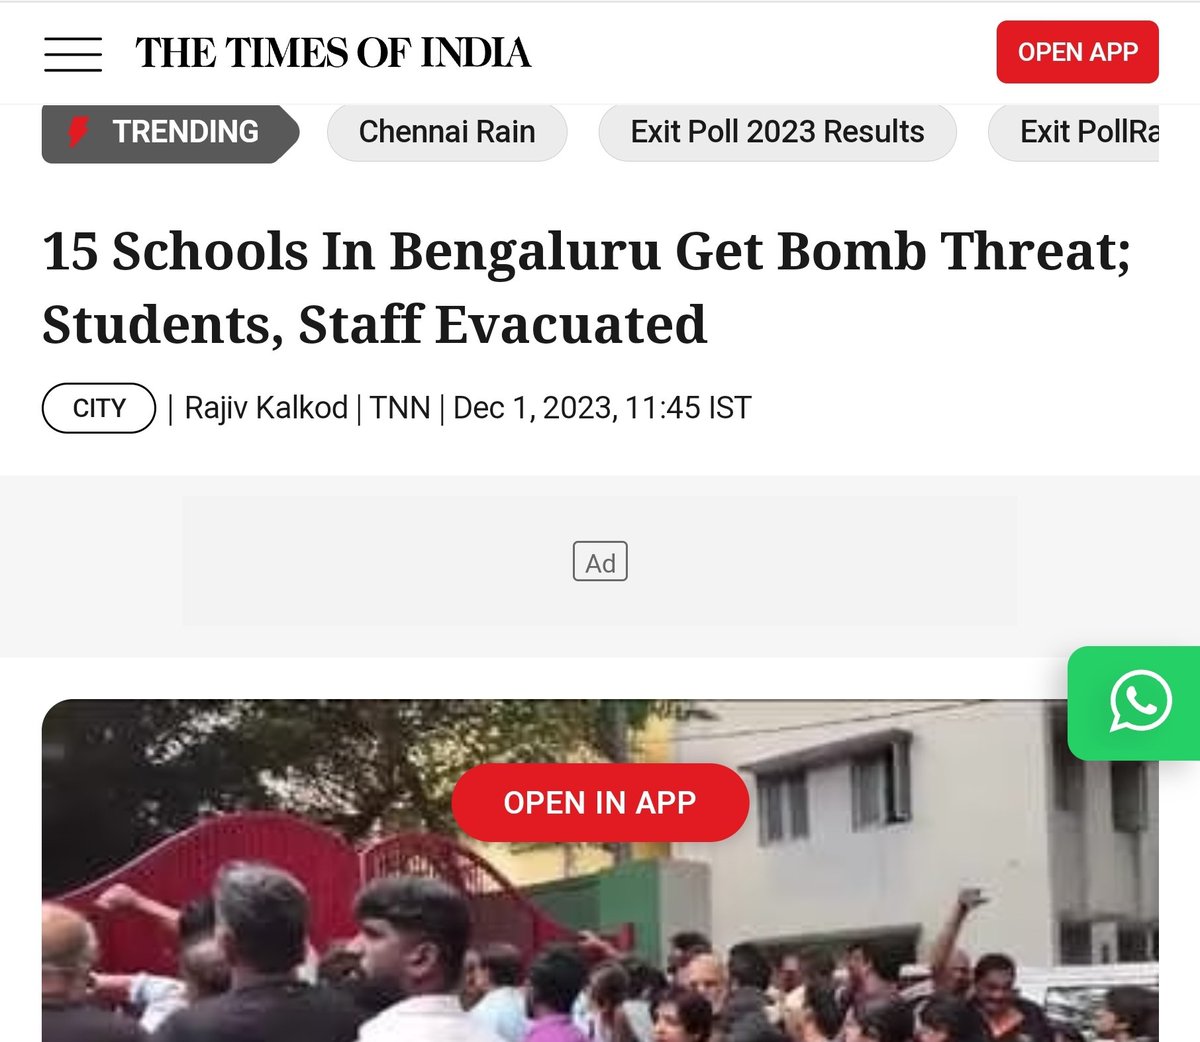 An appeal to Educationministry,police to have training for schools on how to handle bomb threats @narendramodi @MumbaiPolice ottawacitizen.com/news/local-new… #bombthreats #bengaluru #schools #ministryofeducation #EducationDepartment #parents @bmcmumbai #mumbaipolicecommissioner